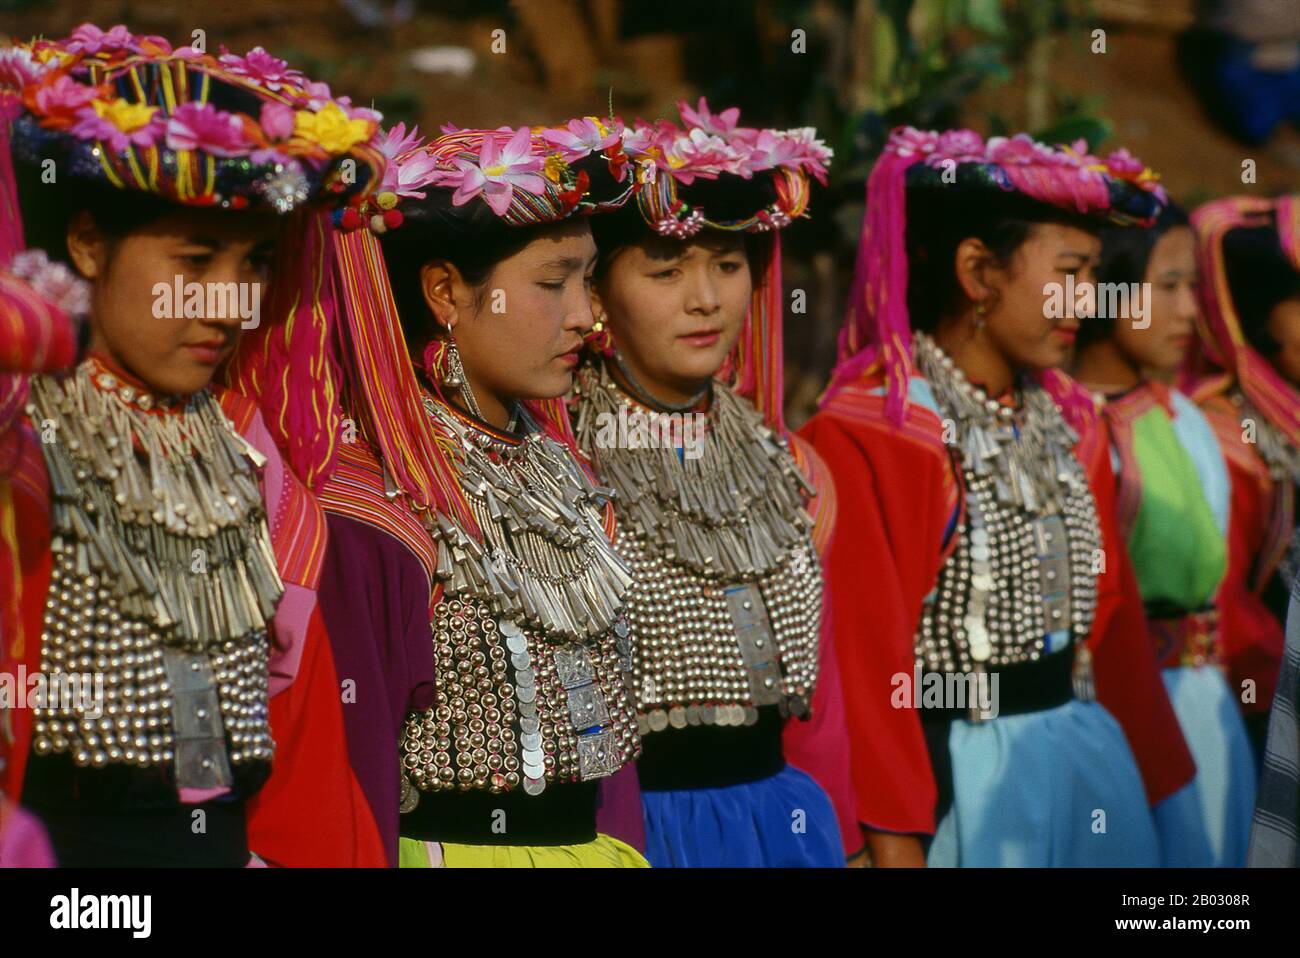 The Lisu people (Lìsù zú) are a Tibeto-Burman ethnic group who inhabit the mountainous regions of Burma (Myanmar), Southwest China, Thailand, and the Indian state of Arunachal Pradesh.  About 730,000 live in Lijiang, Baoshan, Nujiang, Diqing and Dehong prefectures in Yunnan Province, China. The Lisu form one of the 56 ethnic groups officially recognized by the People's Republic of China. In Burma, the Lisu are known as one of the seven Kachin minority groups and an estimated population of 350,000 Lisu live in Kachin and Shan State in Burma. Approximately 55,000 live in Thailand, where they are Stock Photo